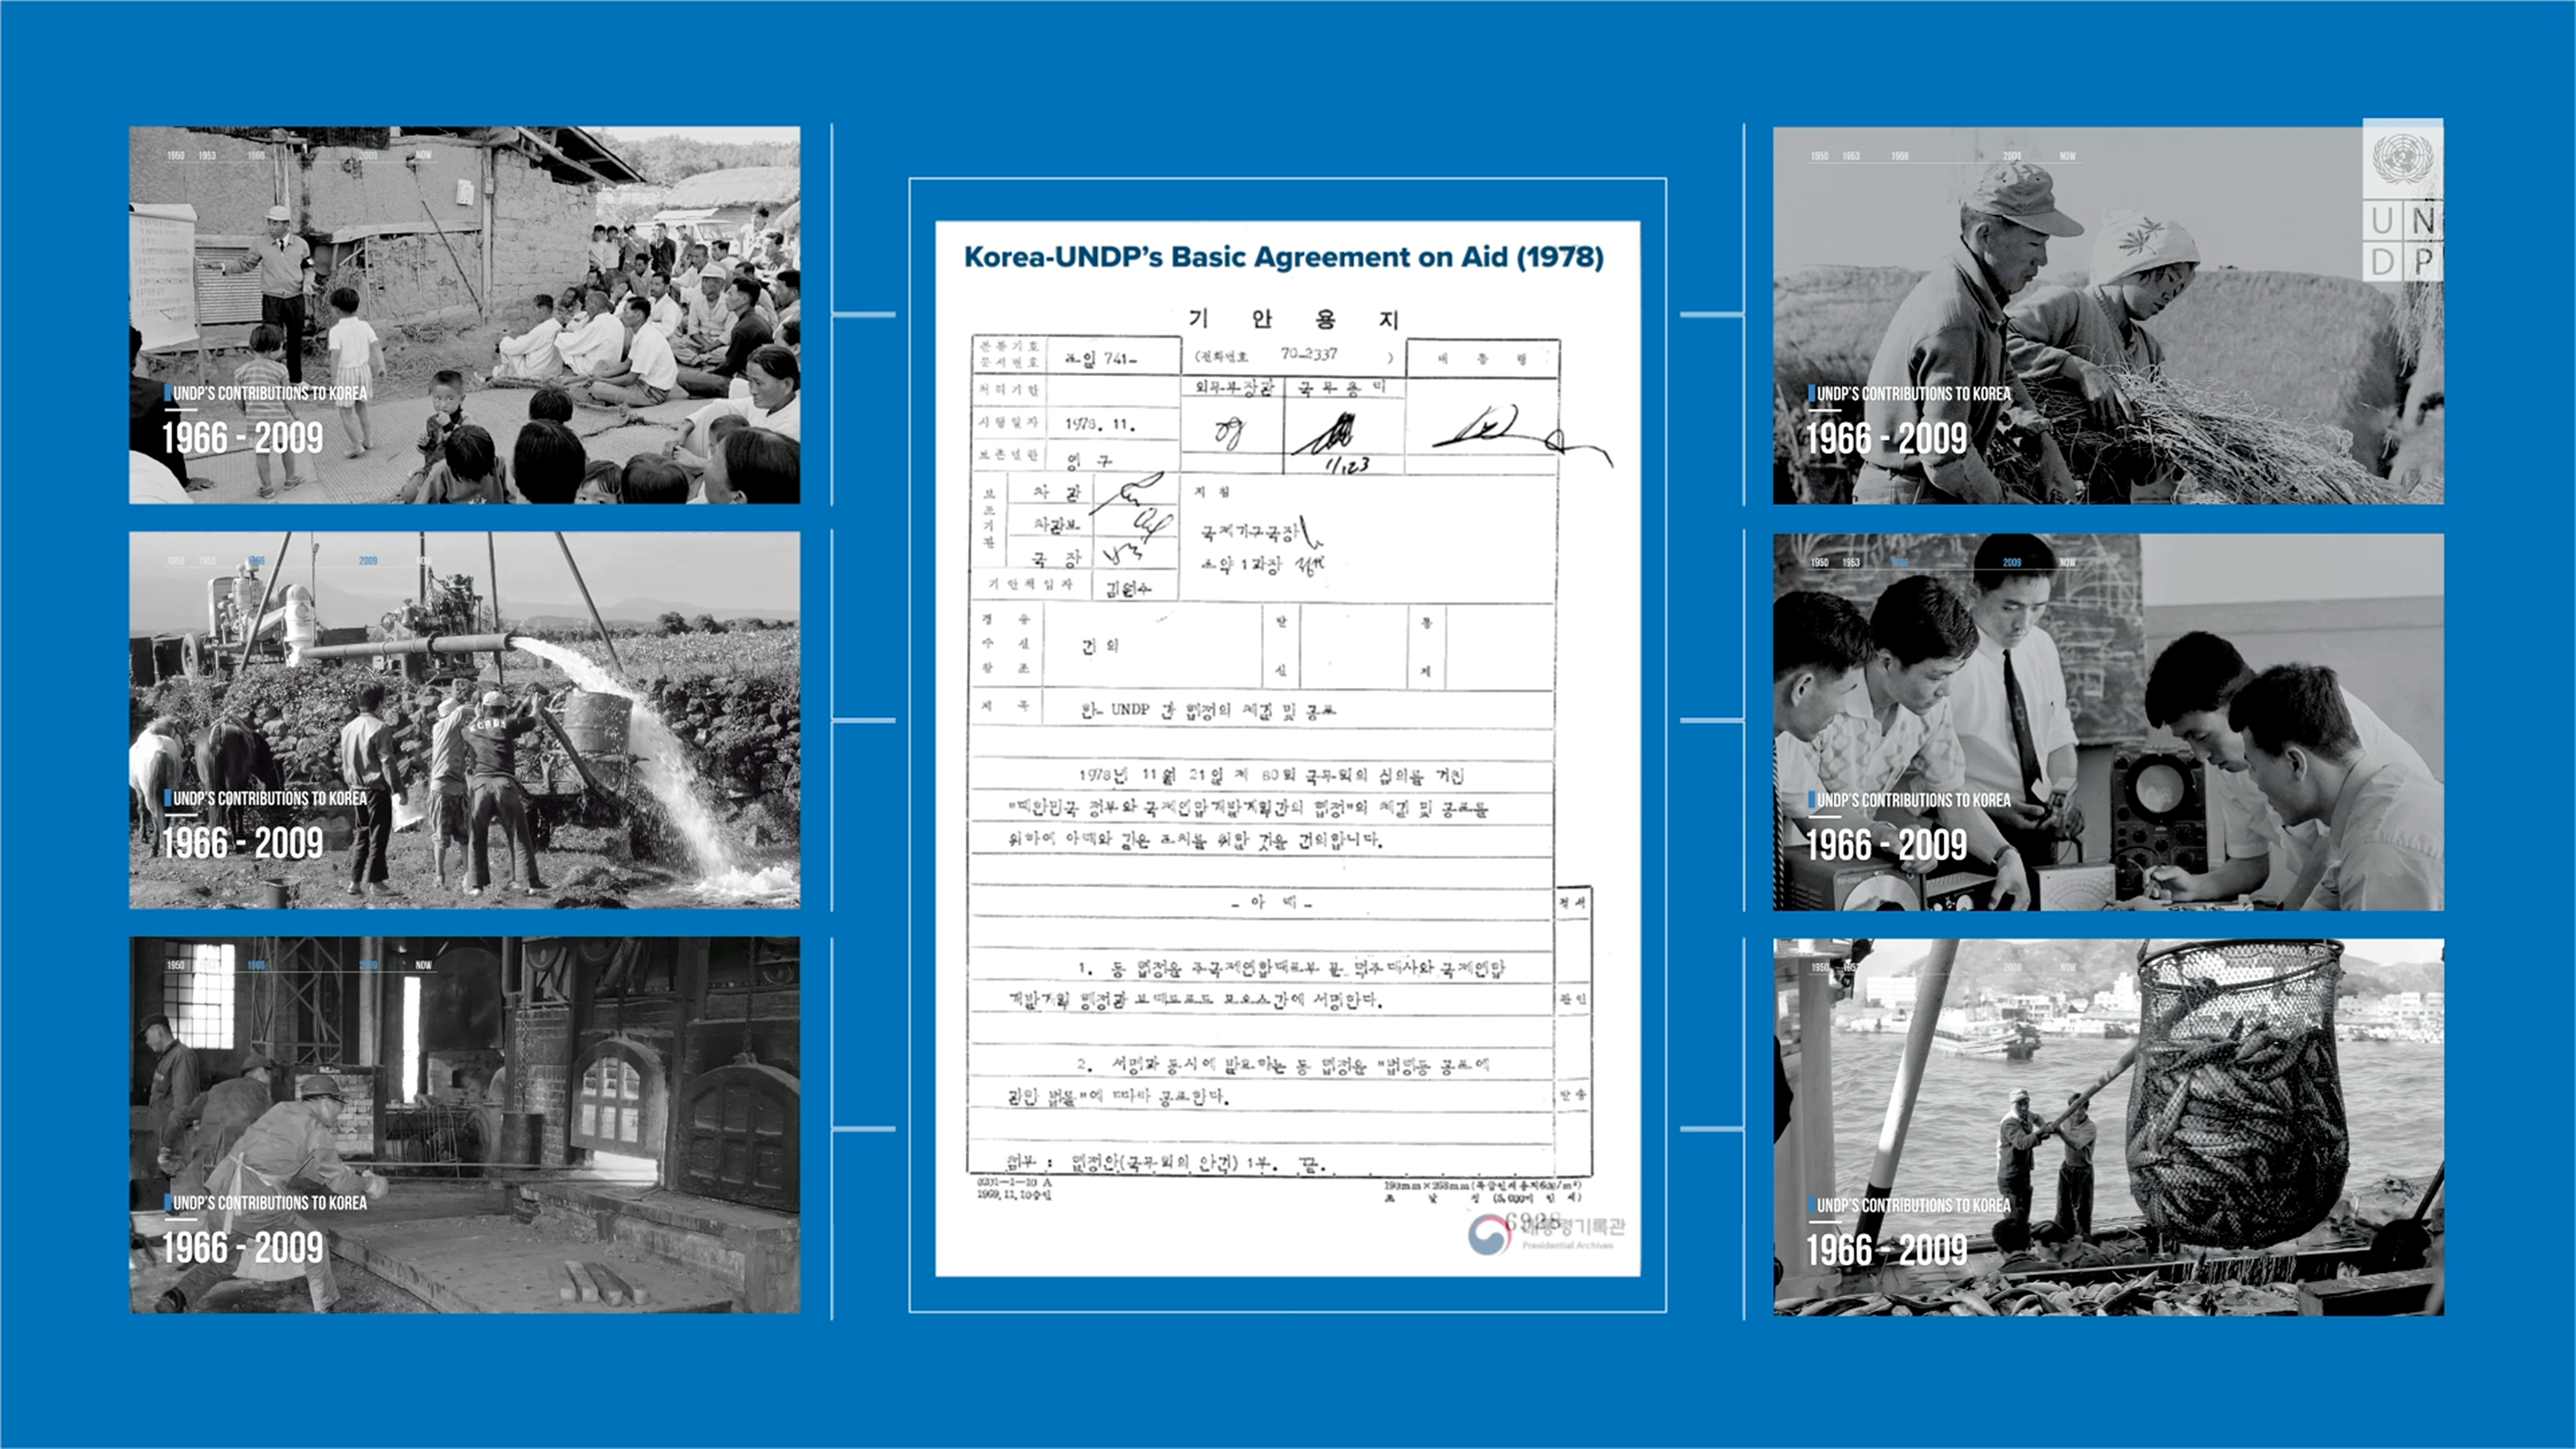 A collage of images of Korea-UNDP's basic agreement on aid and UNDP's support to Korea from 1966 till 2009.